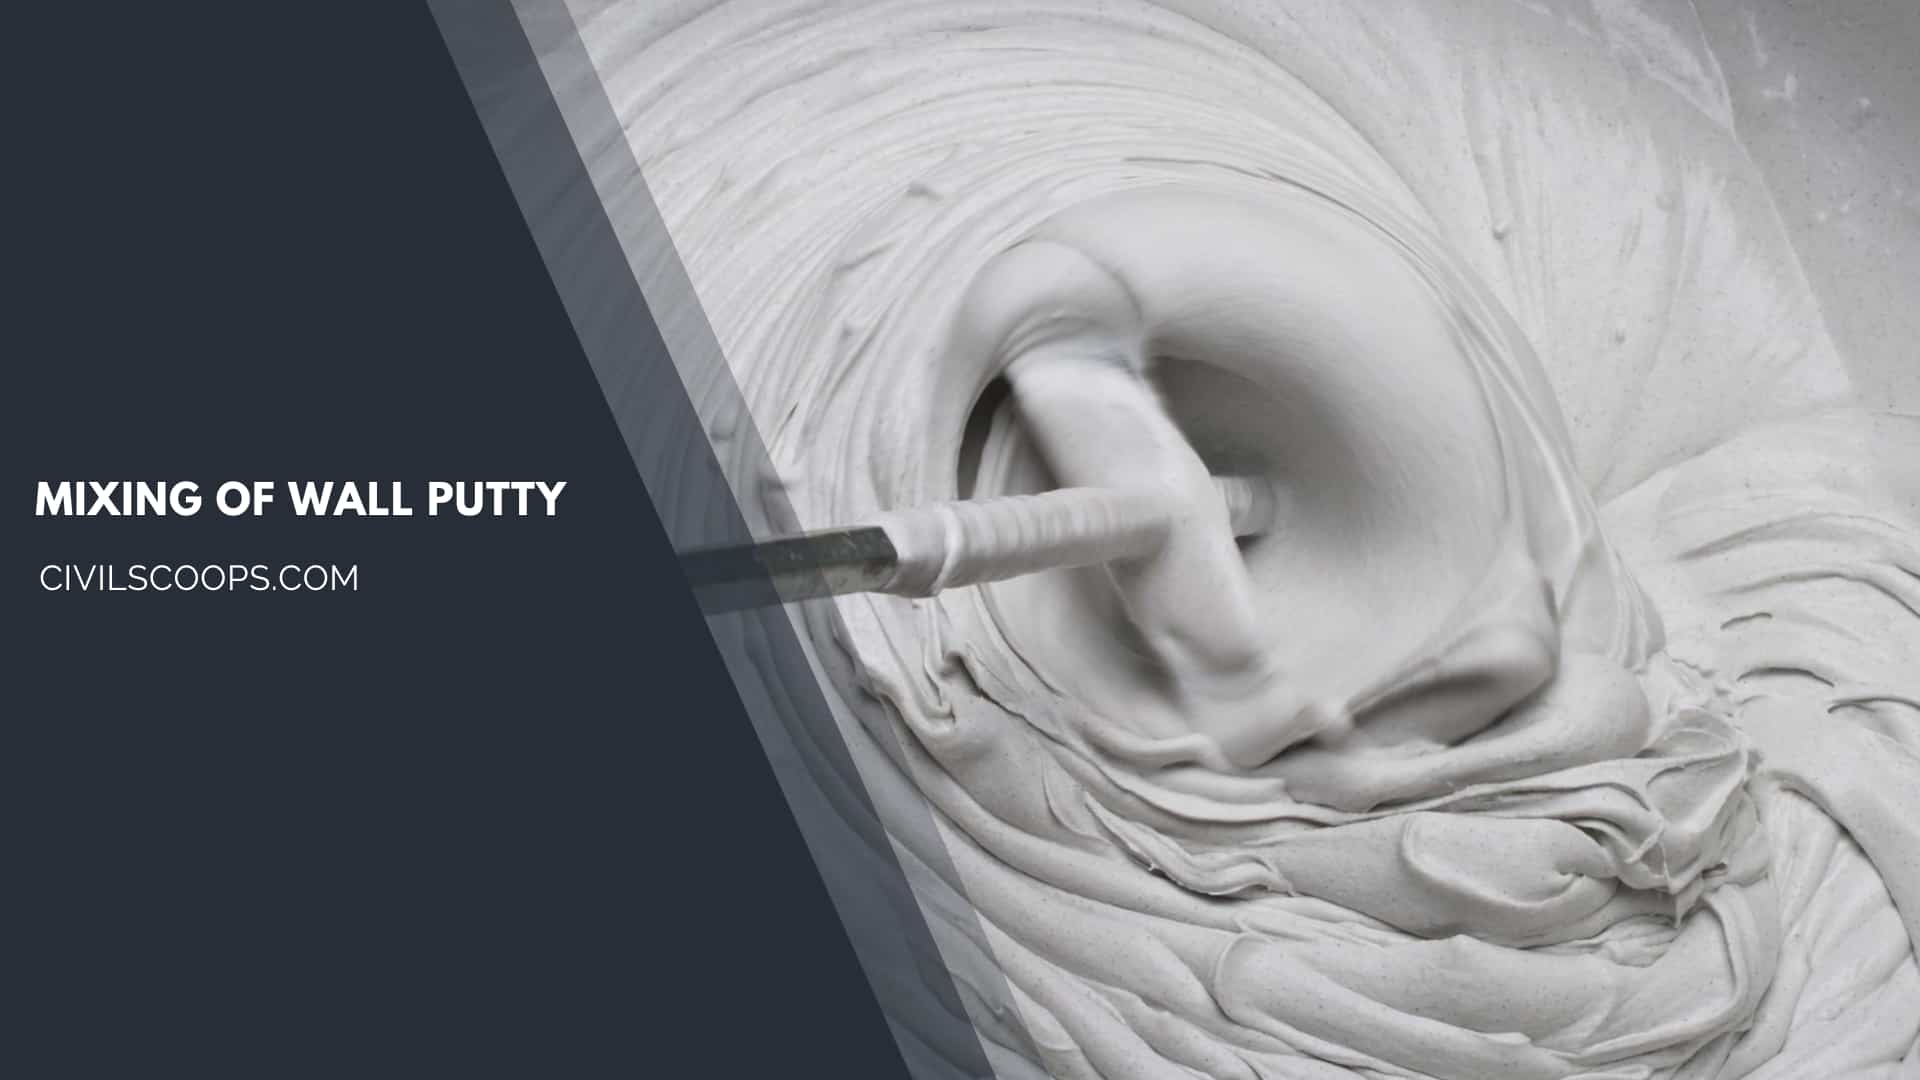 Mixing of Wall Putty